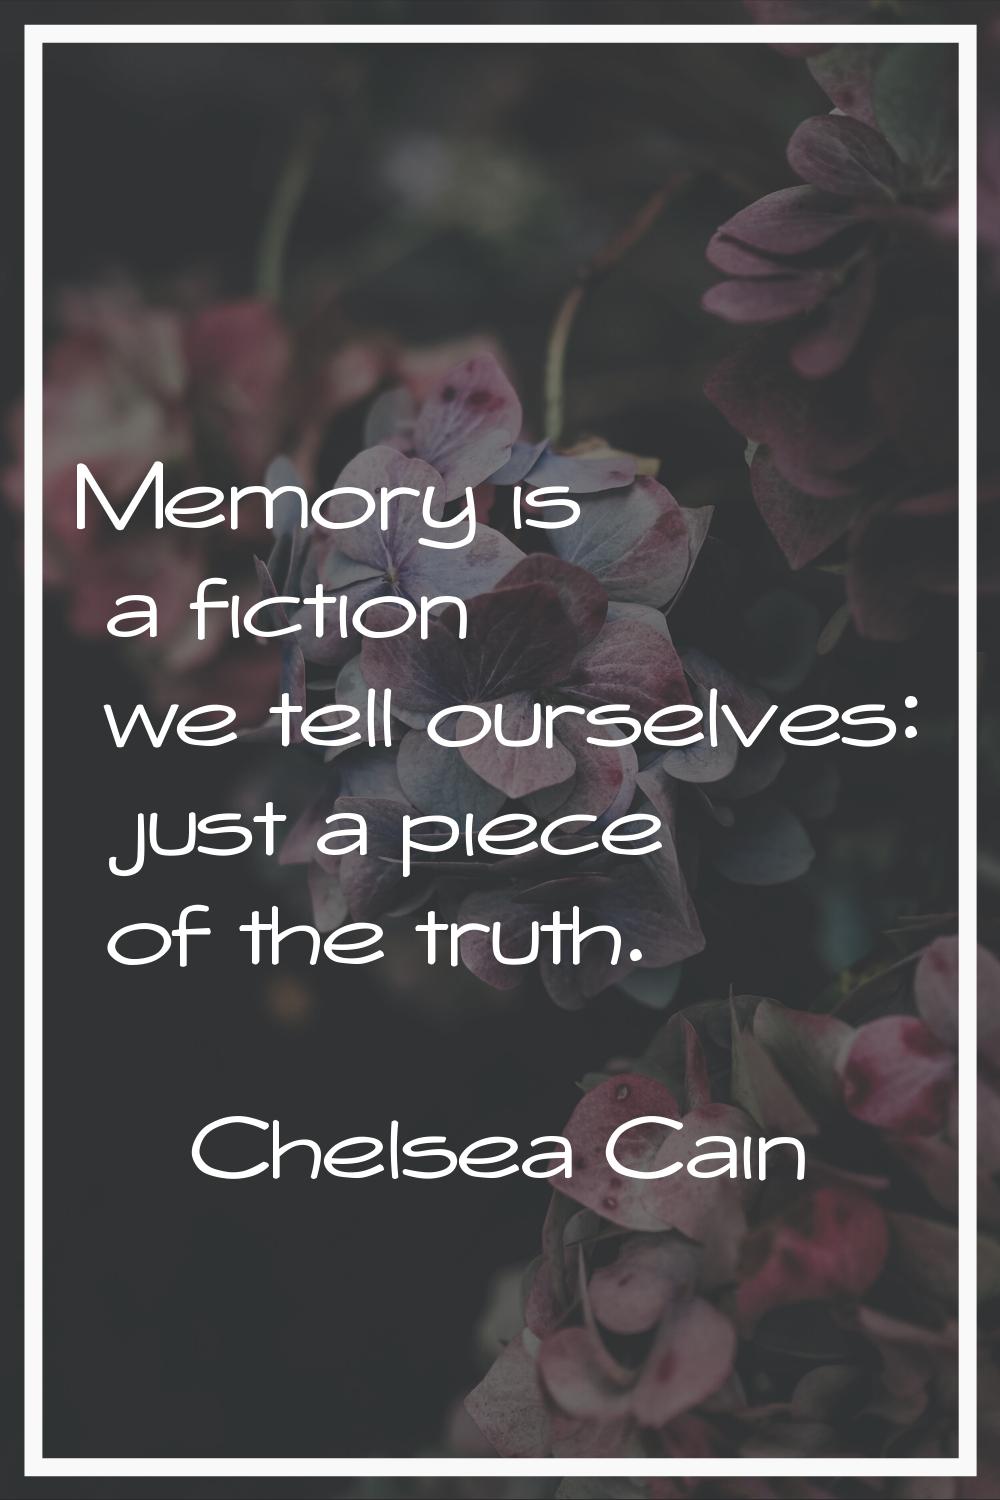 Memory is a fiction we tell ourselves: just a piece of the truth.